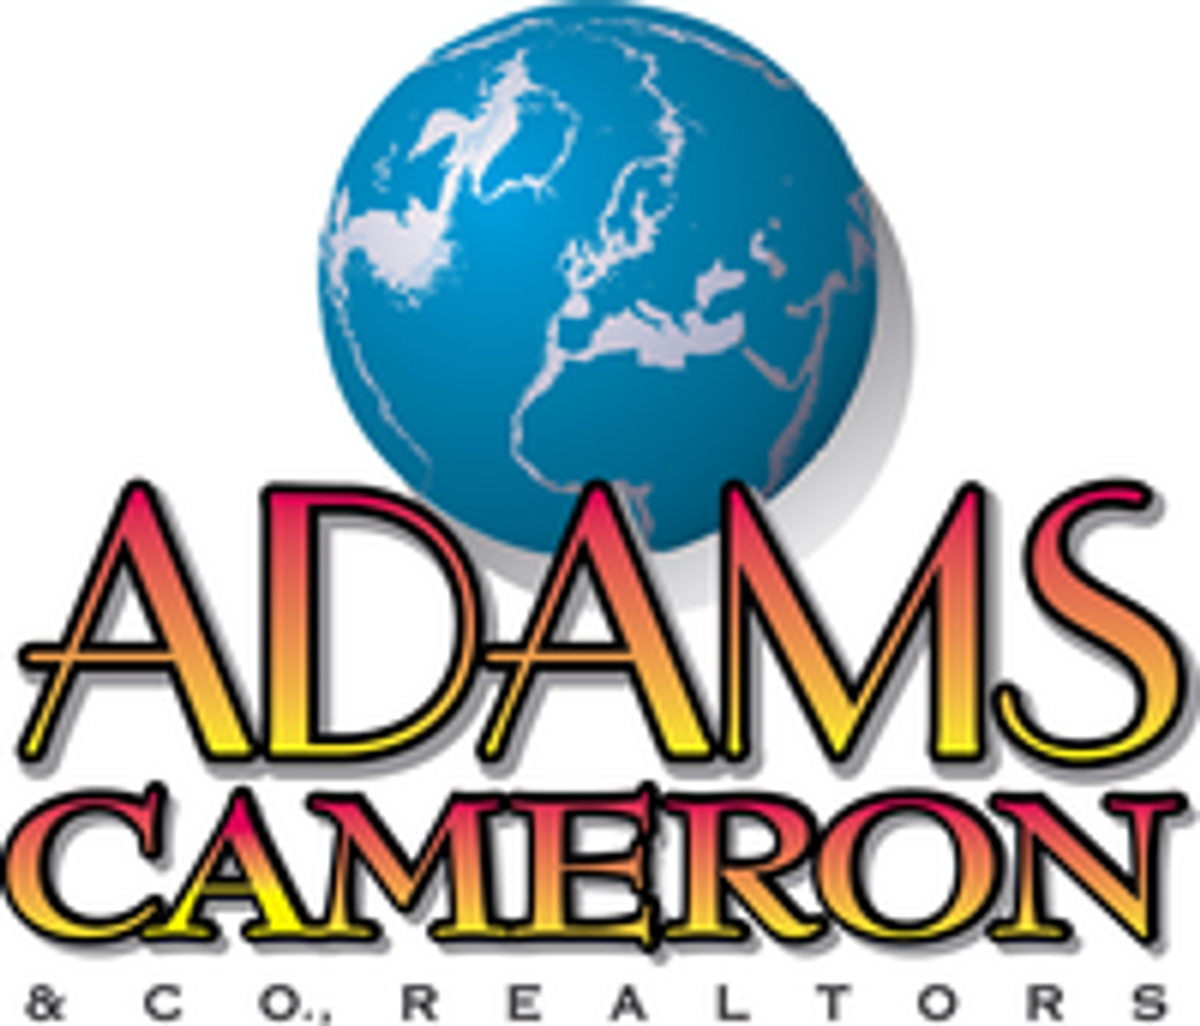 Photo for Diane Schamay, Listing Agent at Adams, Cameron & Co., Realtors